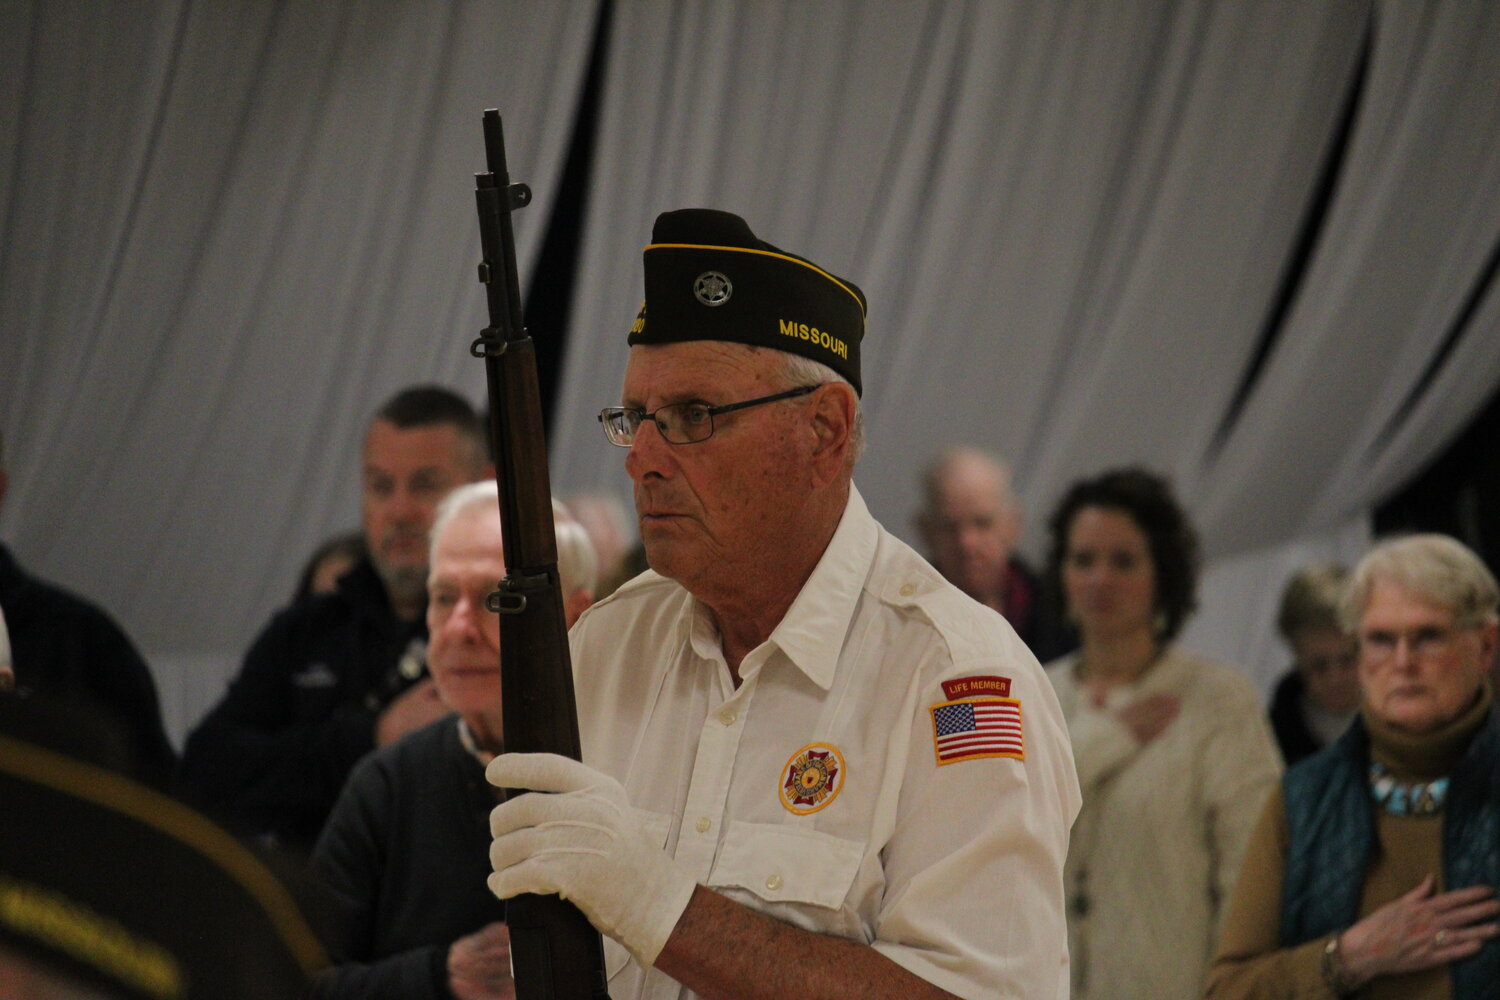 A member of the color guard stands at attention.